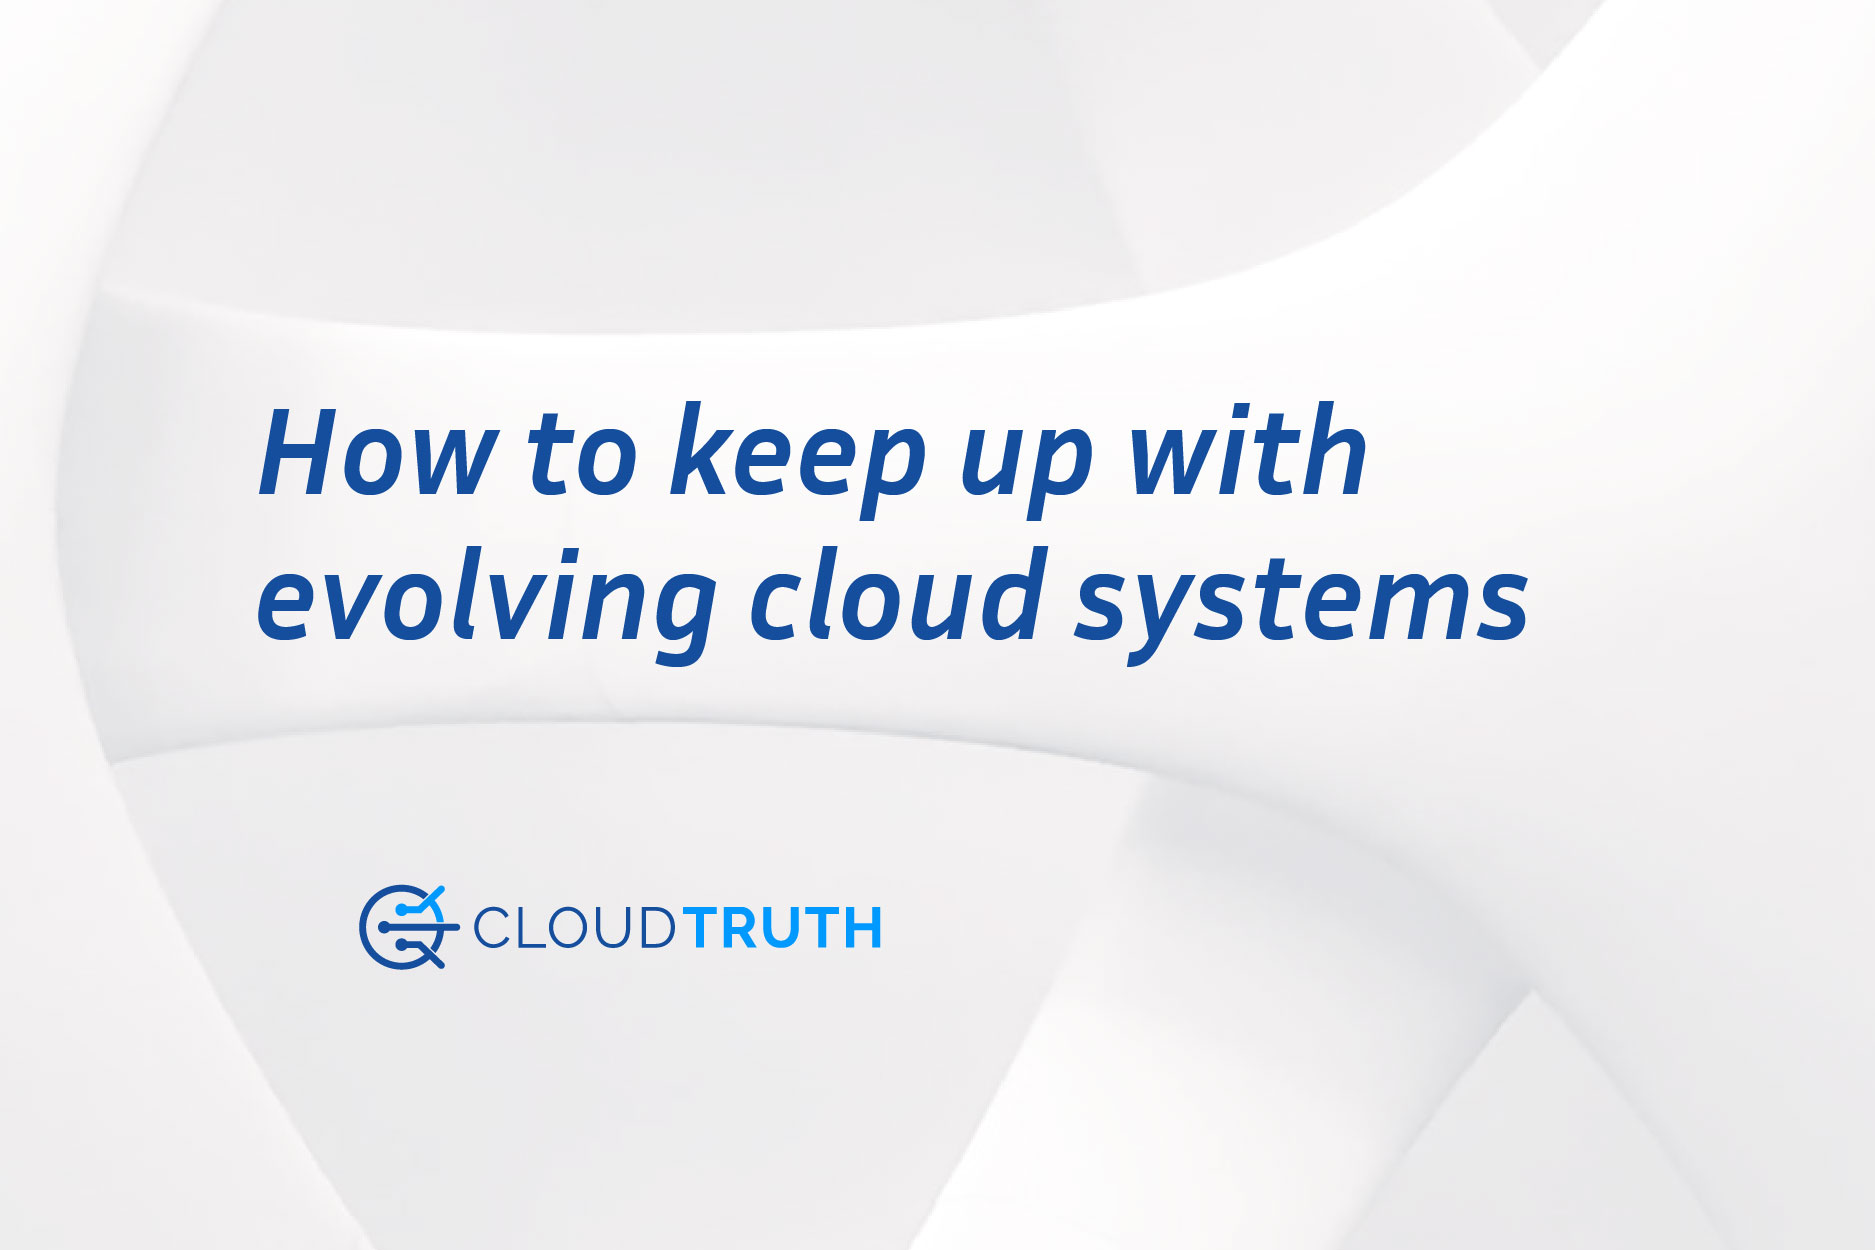 Cloud Systems Are Evolving. Here’s What You Need to Do to Keep Up.